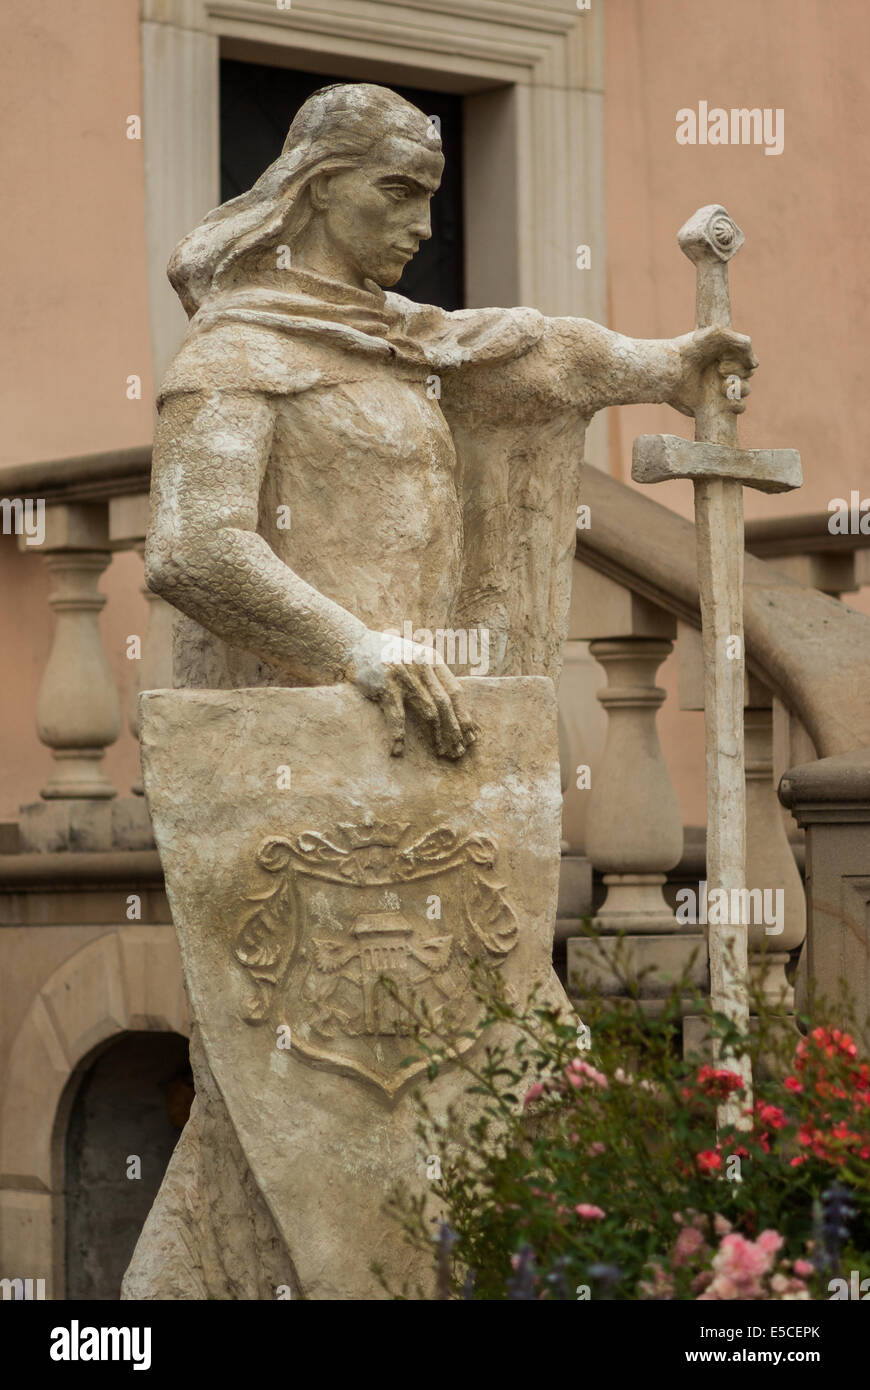 One of the knight statues guarding the side entrance to the Royal Castle, Niepolomice, southern Poland Stock Photo